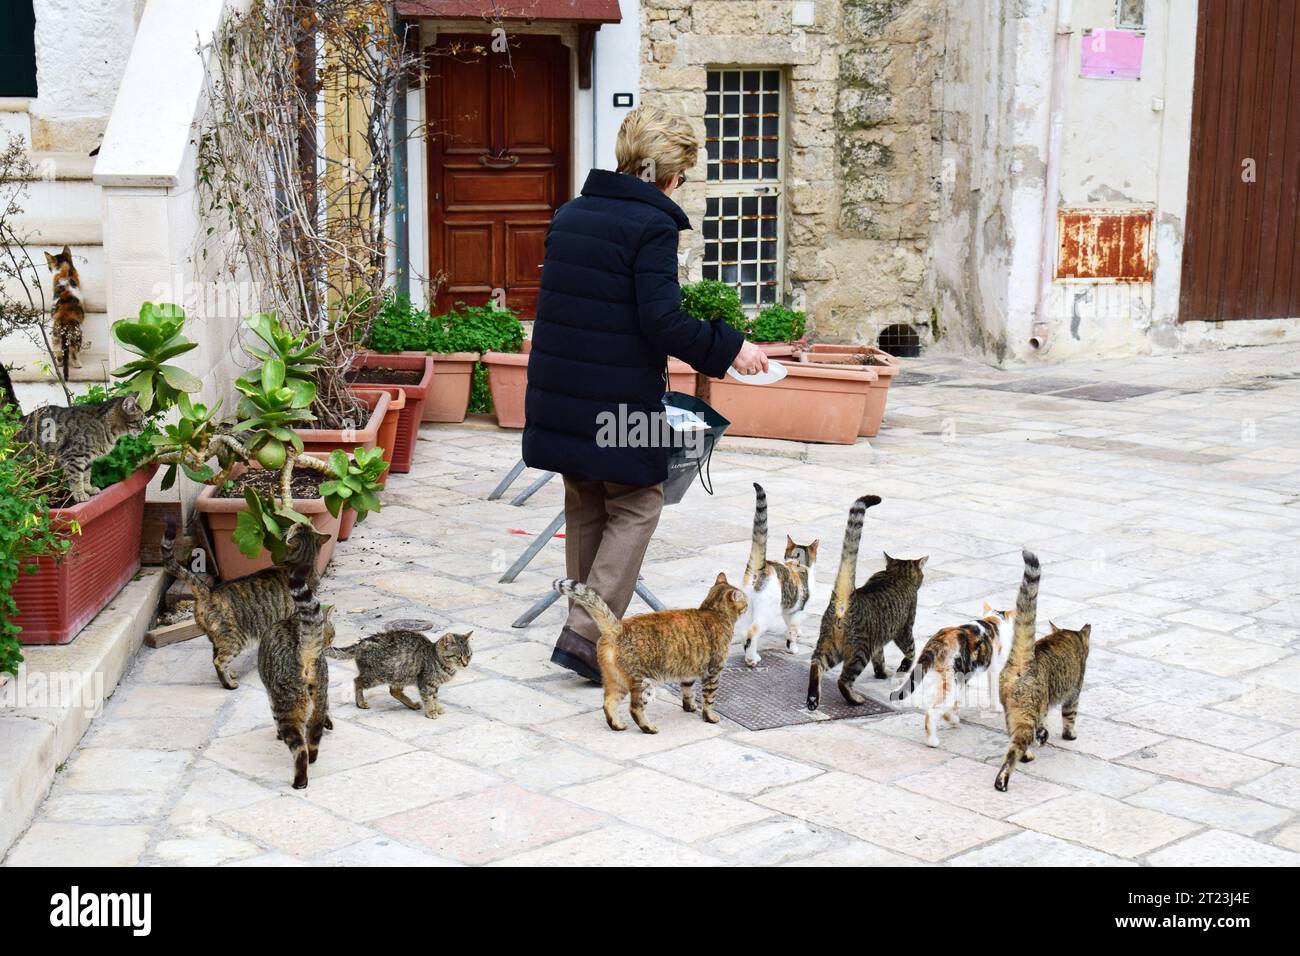 POLIGNANO A MARE, ITALY - FEBRUARY 6, 2019: An elderly woman and stray cats on the street in Polignano A Mare, a town in Apulia, Southern Italy. Stock Photo